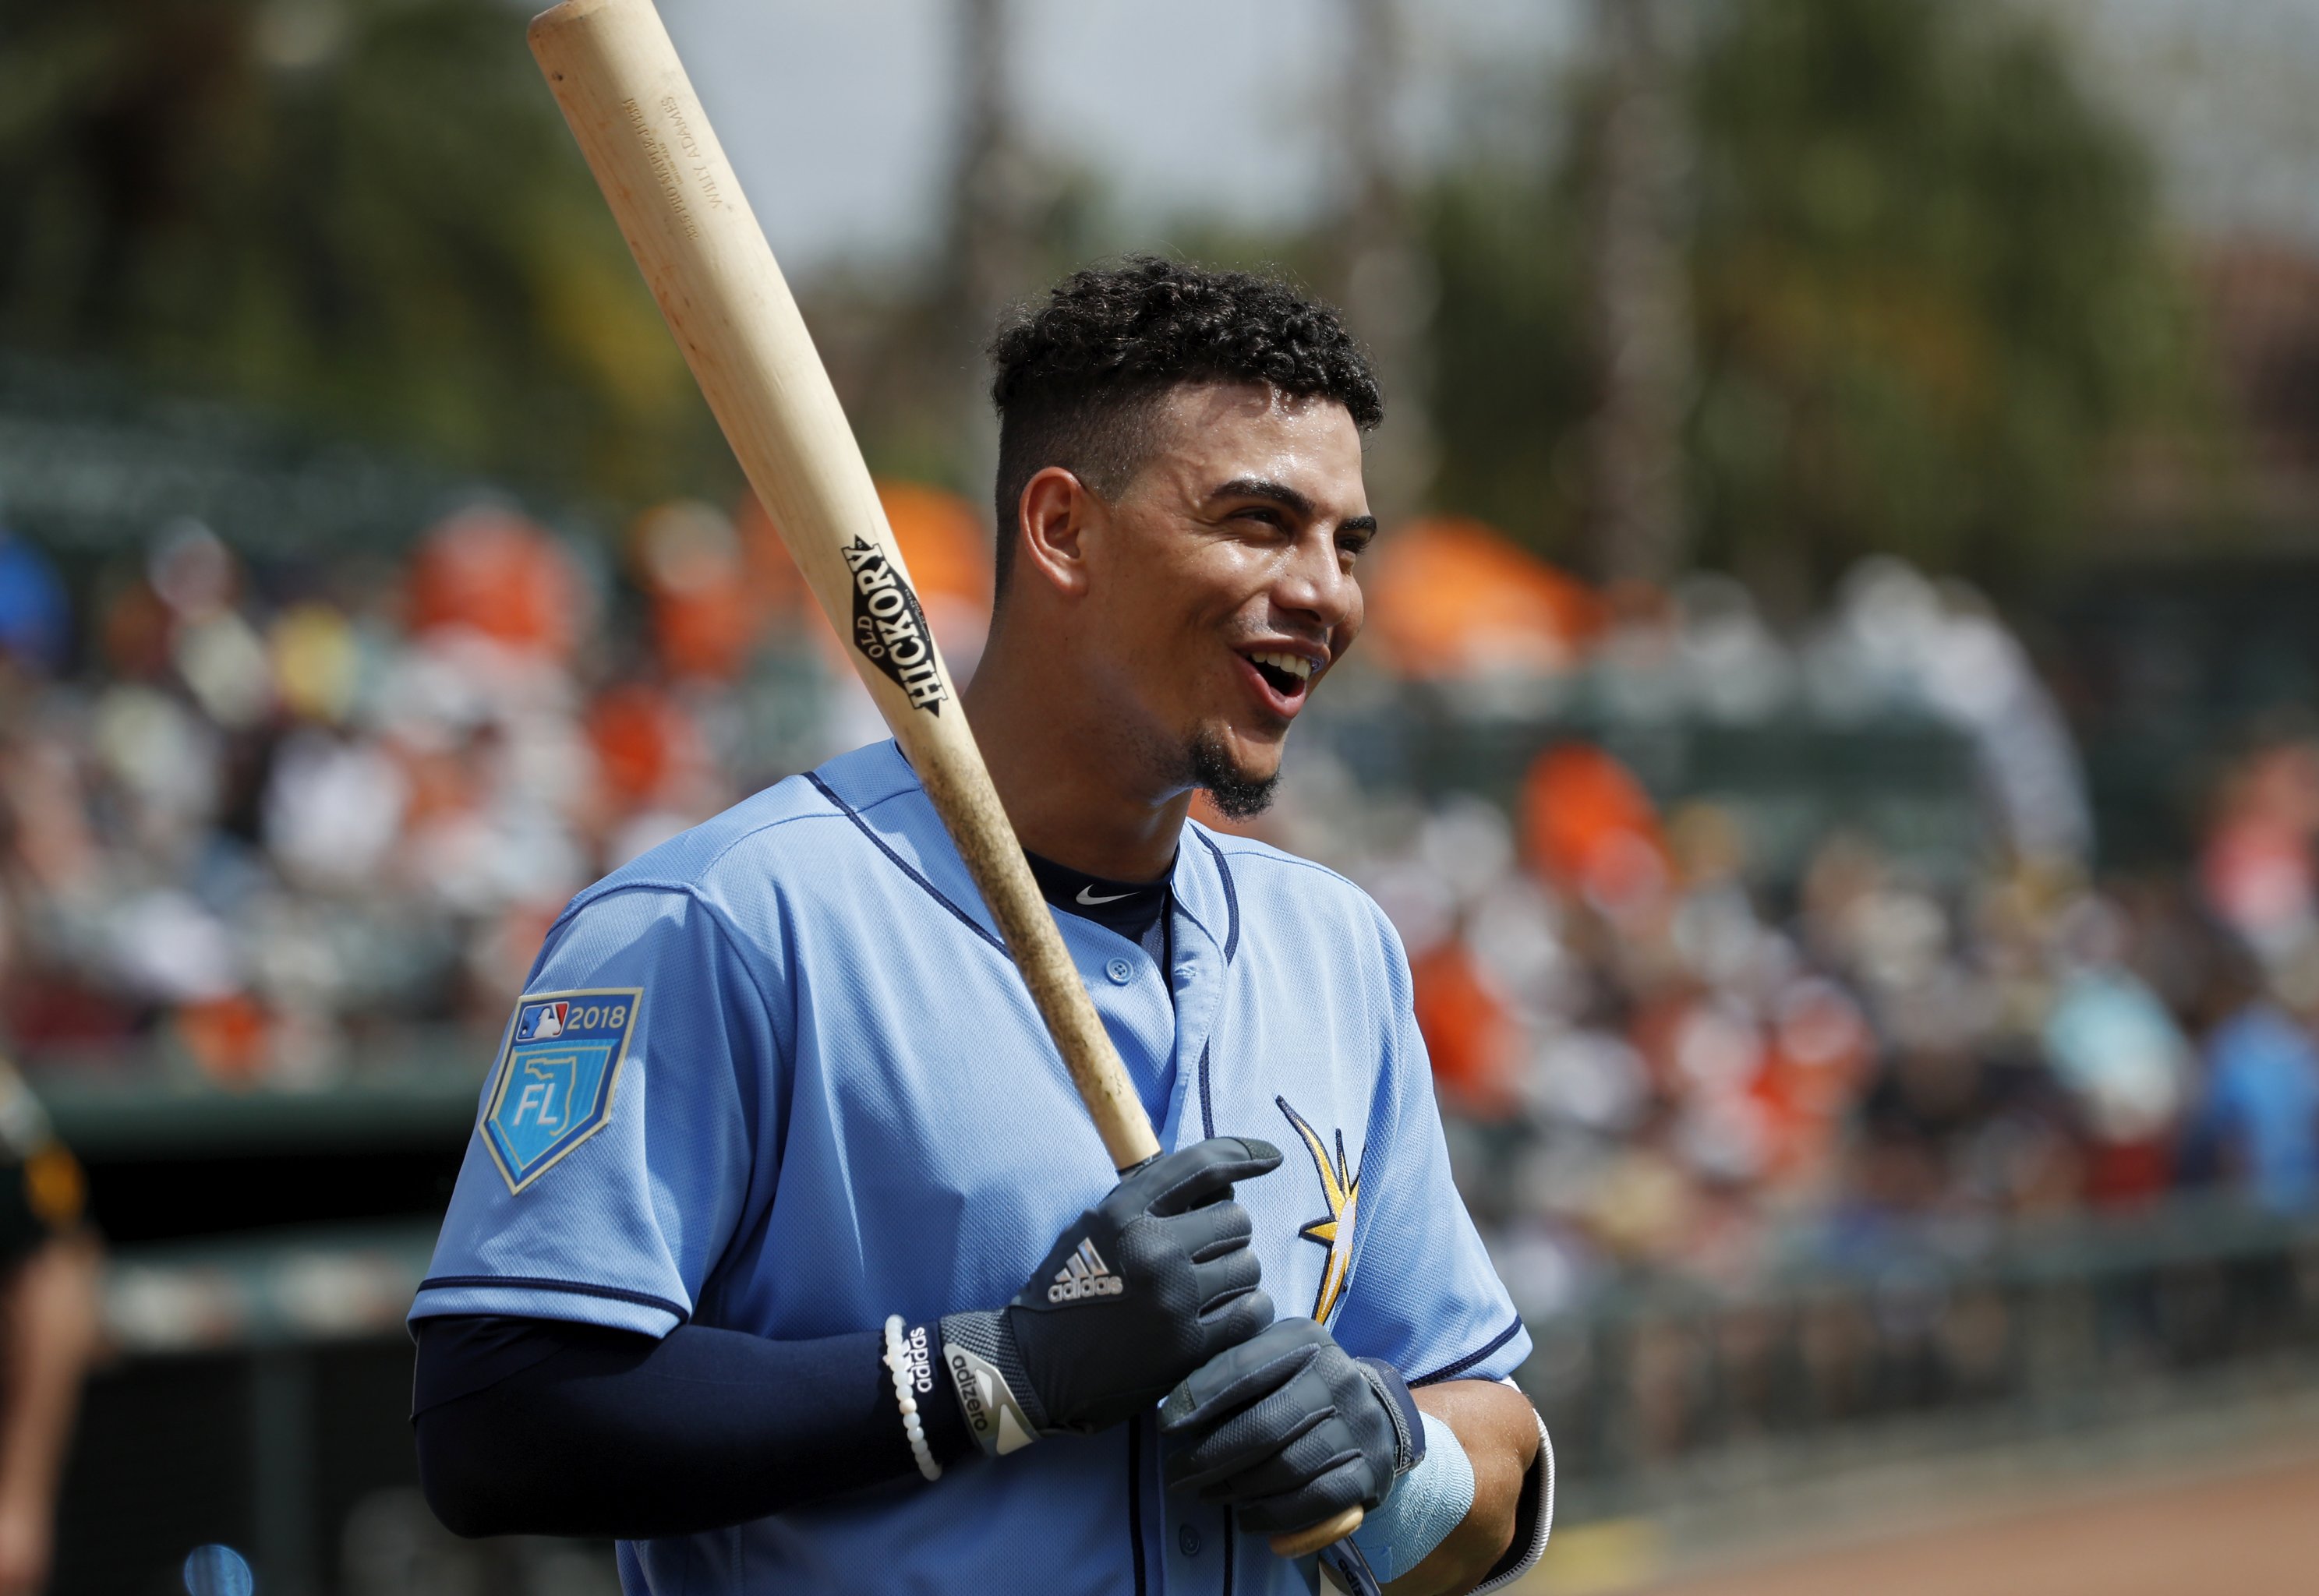 Willy Adames is ready to join the Rays in 2018, whenever that may